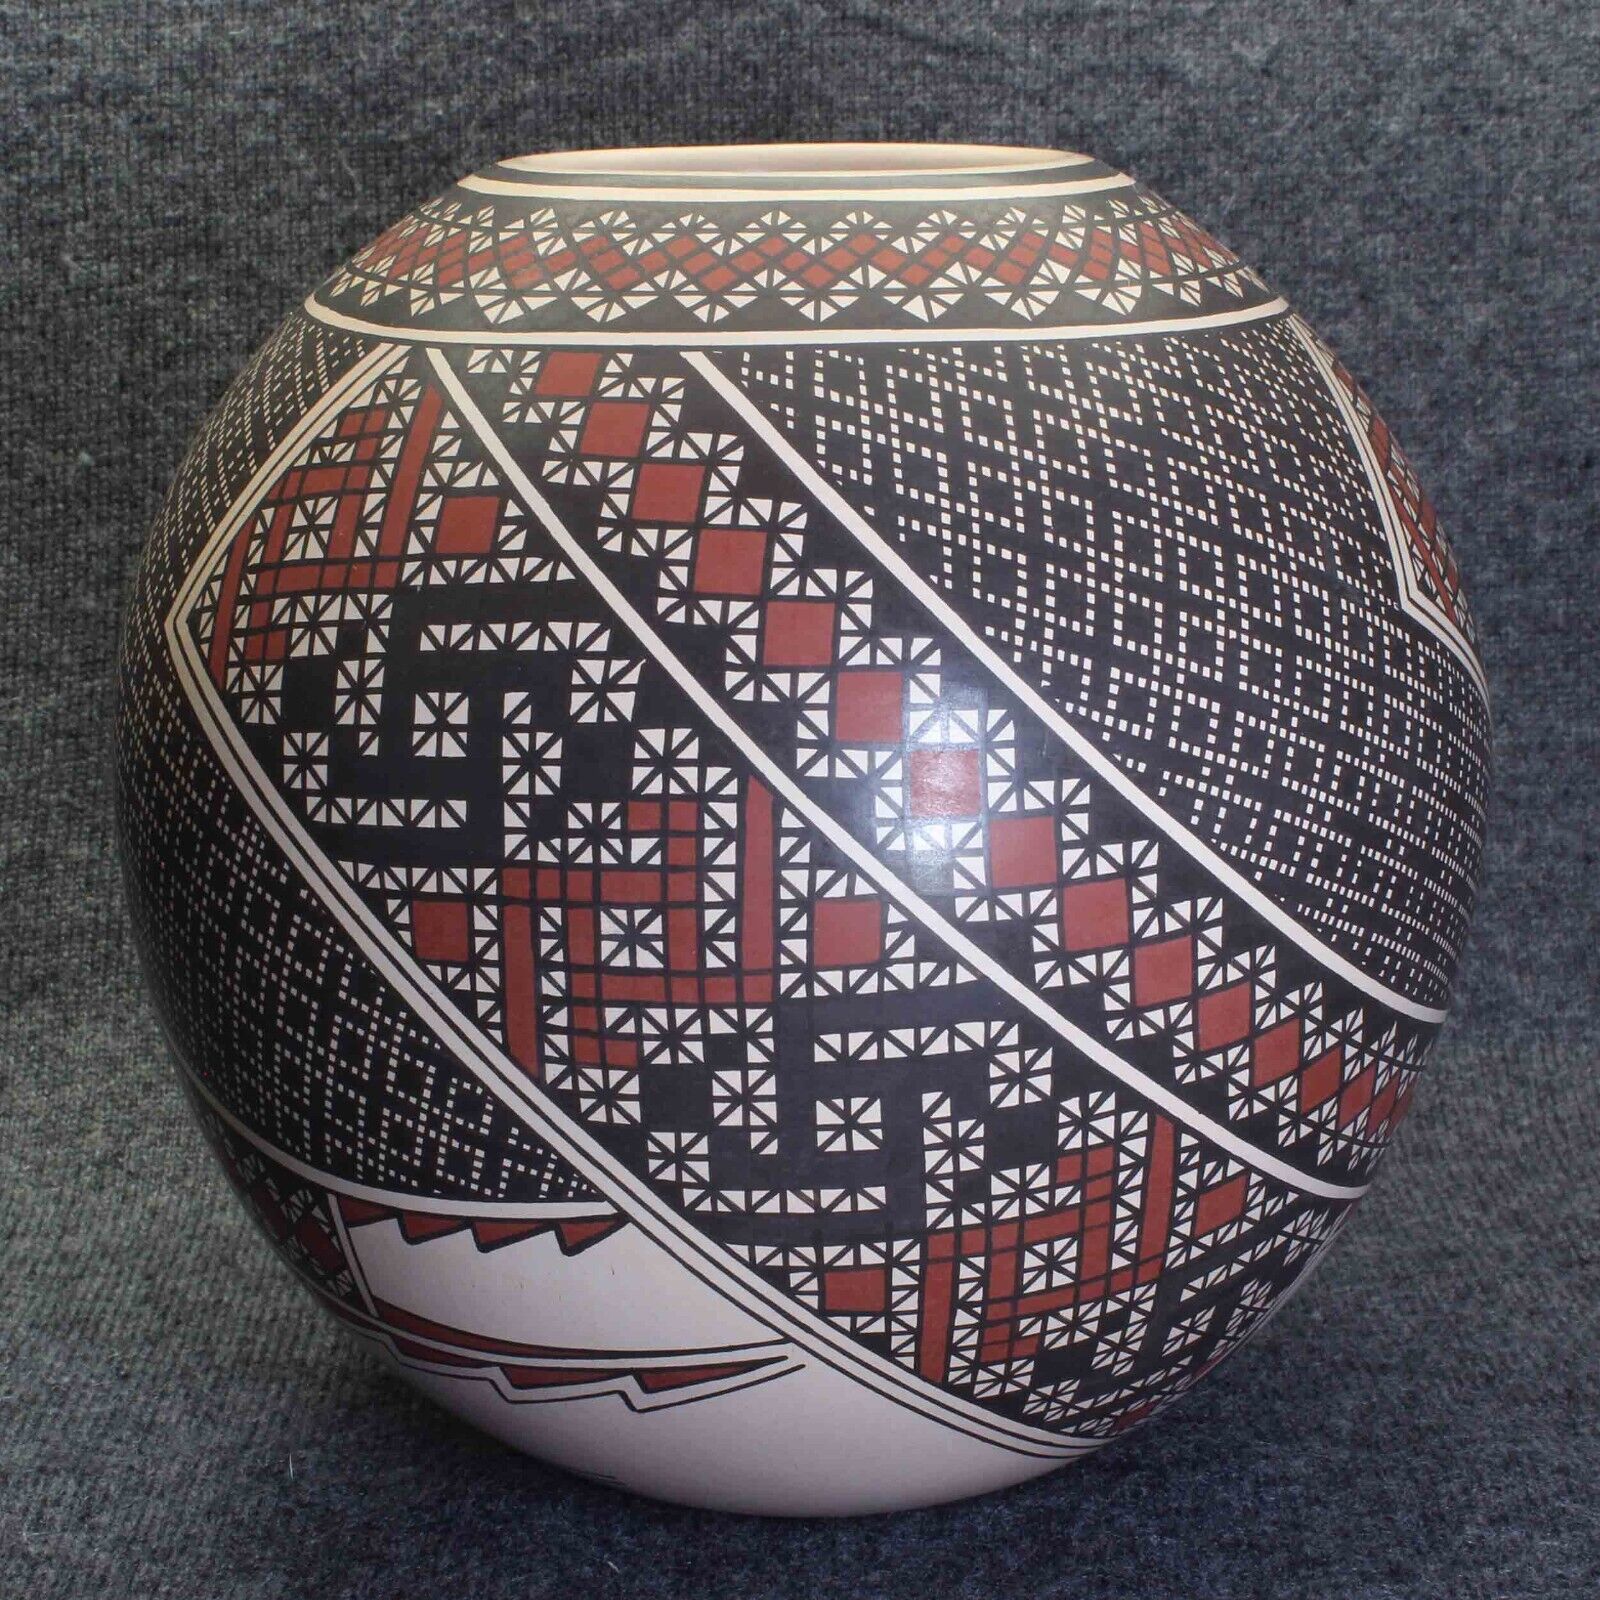 Round Large Mexican Pottery Intense Hand Painted Patterns Hand Coiled Folk Art